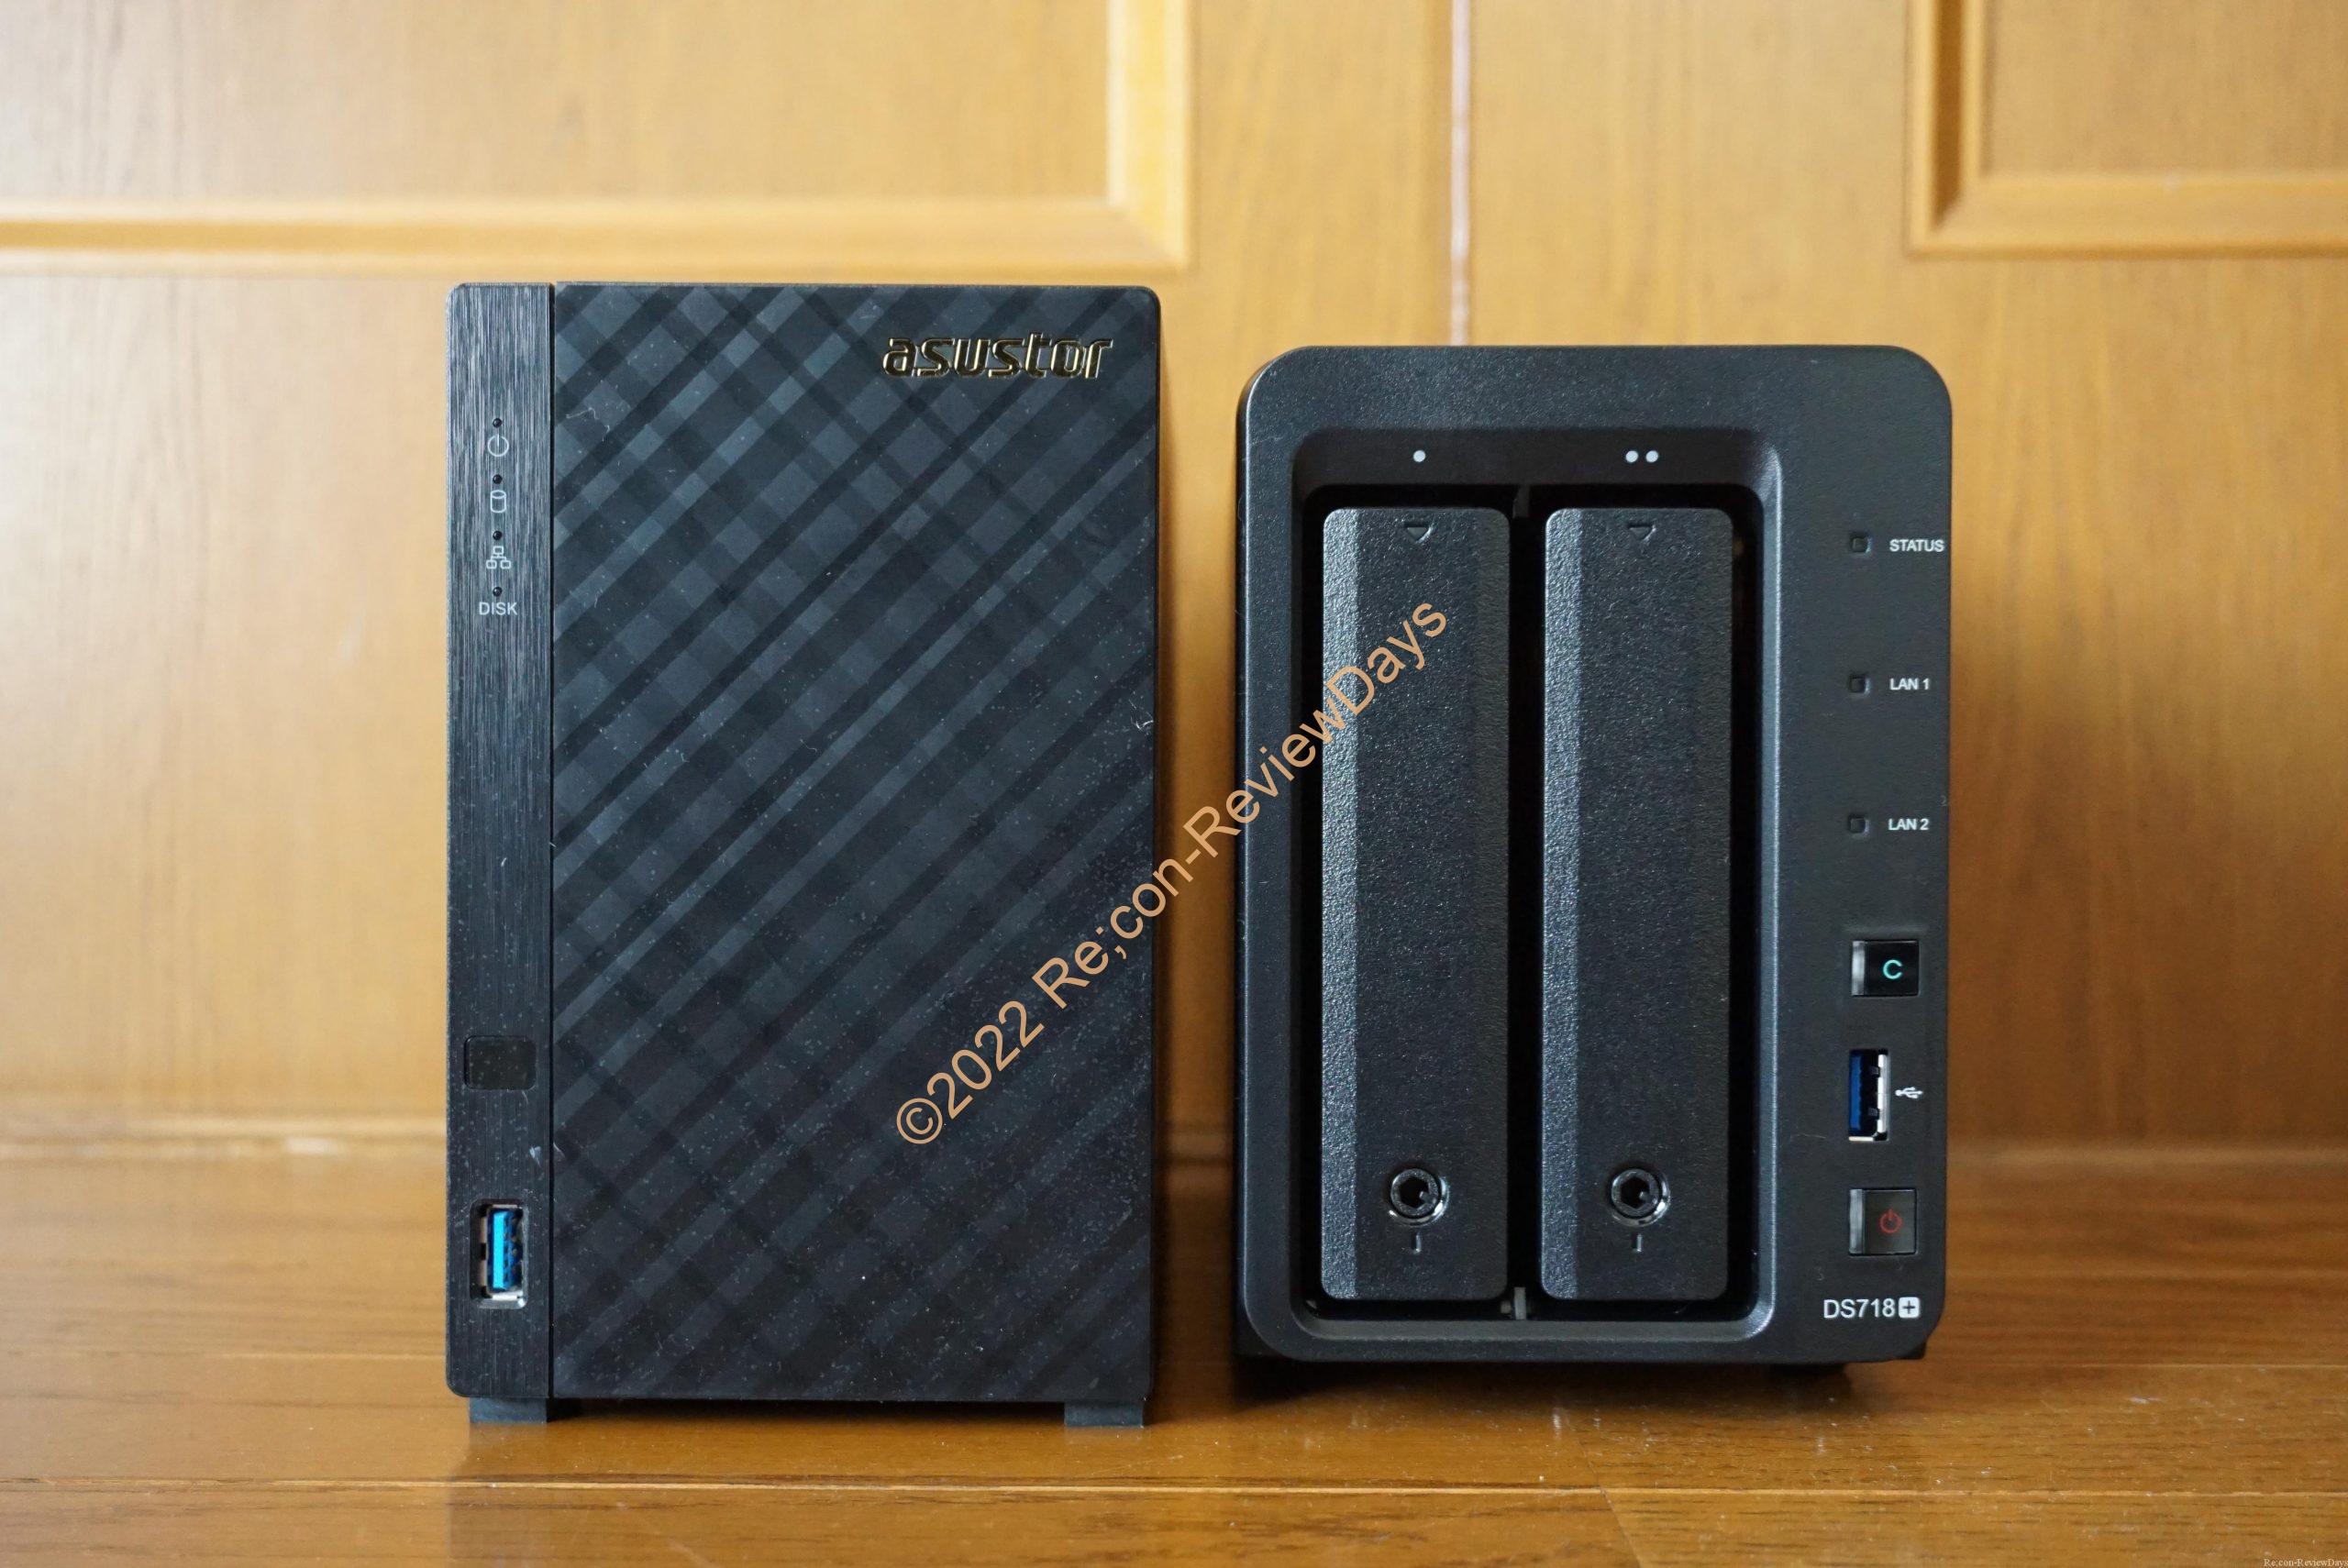 Synology製のNAS「DS718+」を購入しました #NAS #Synology #DS718Plus